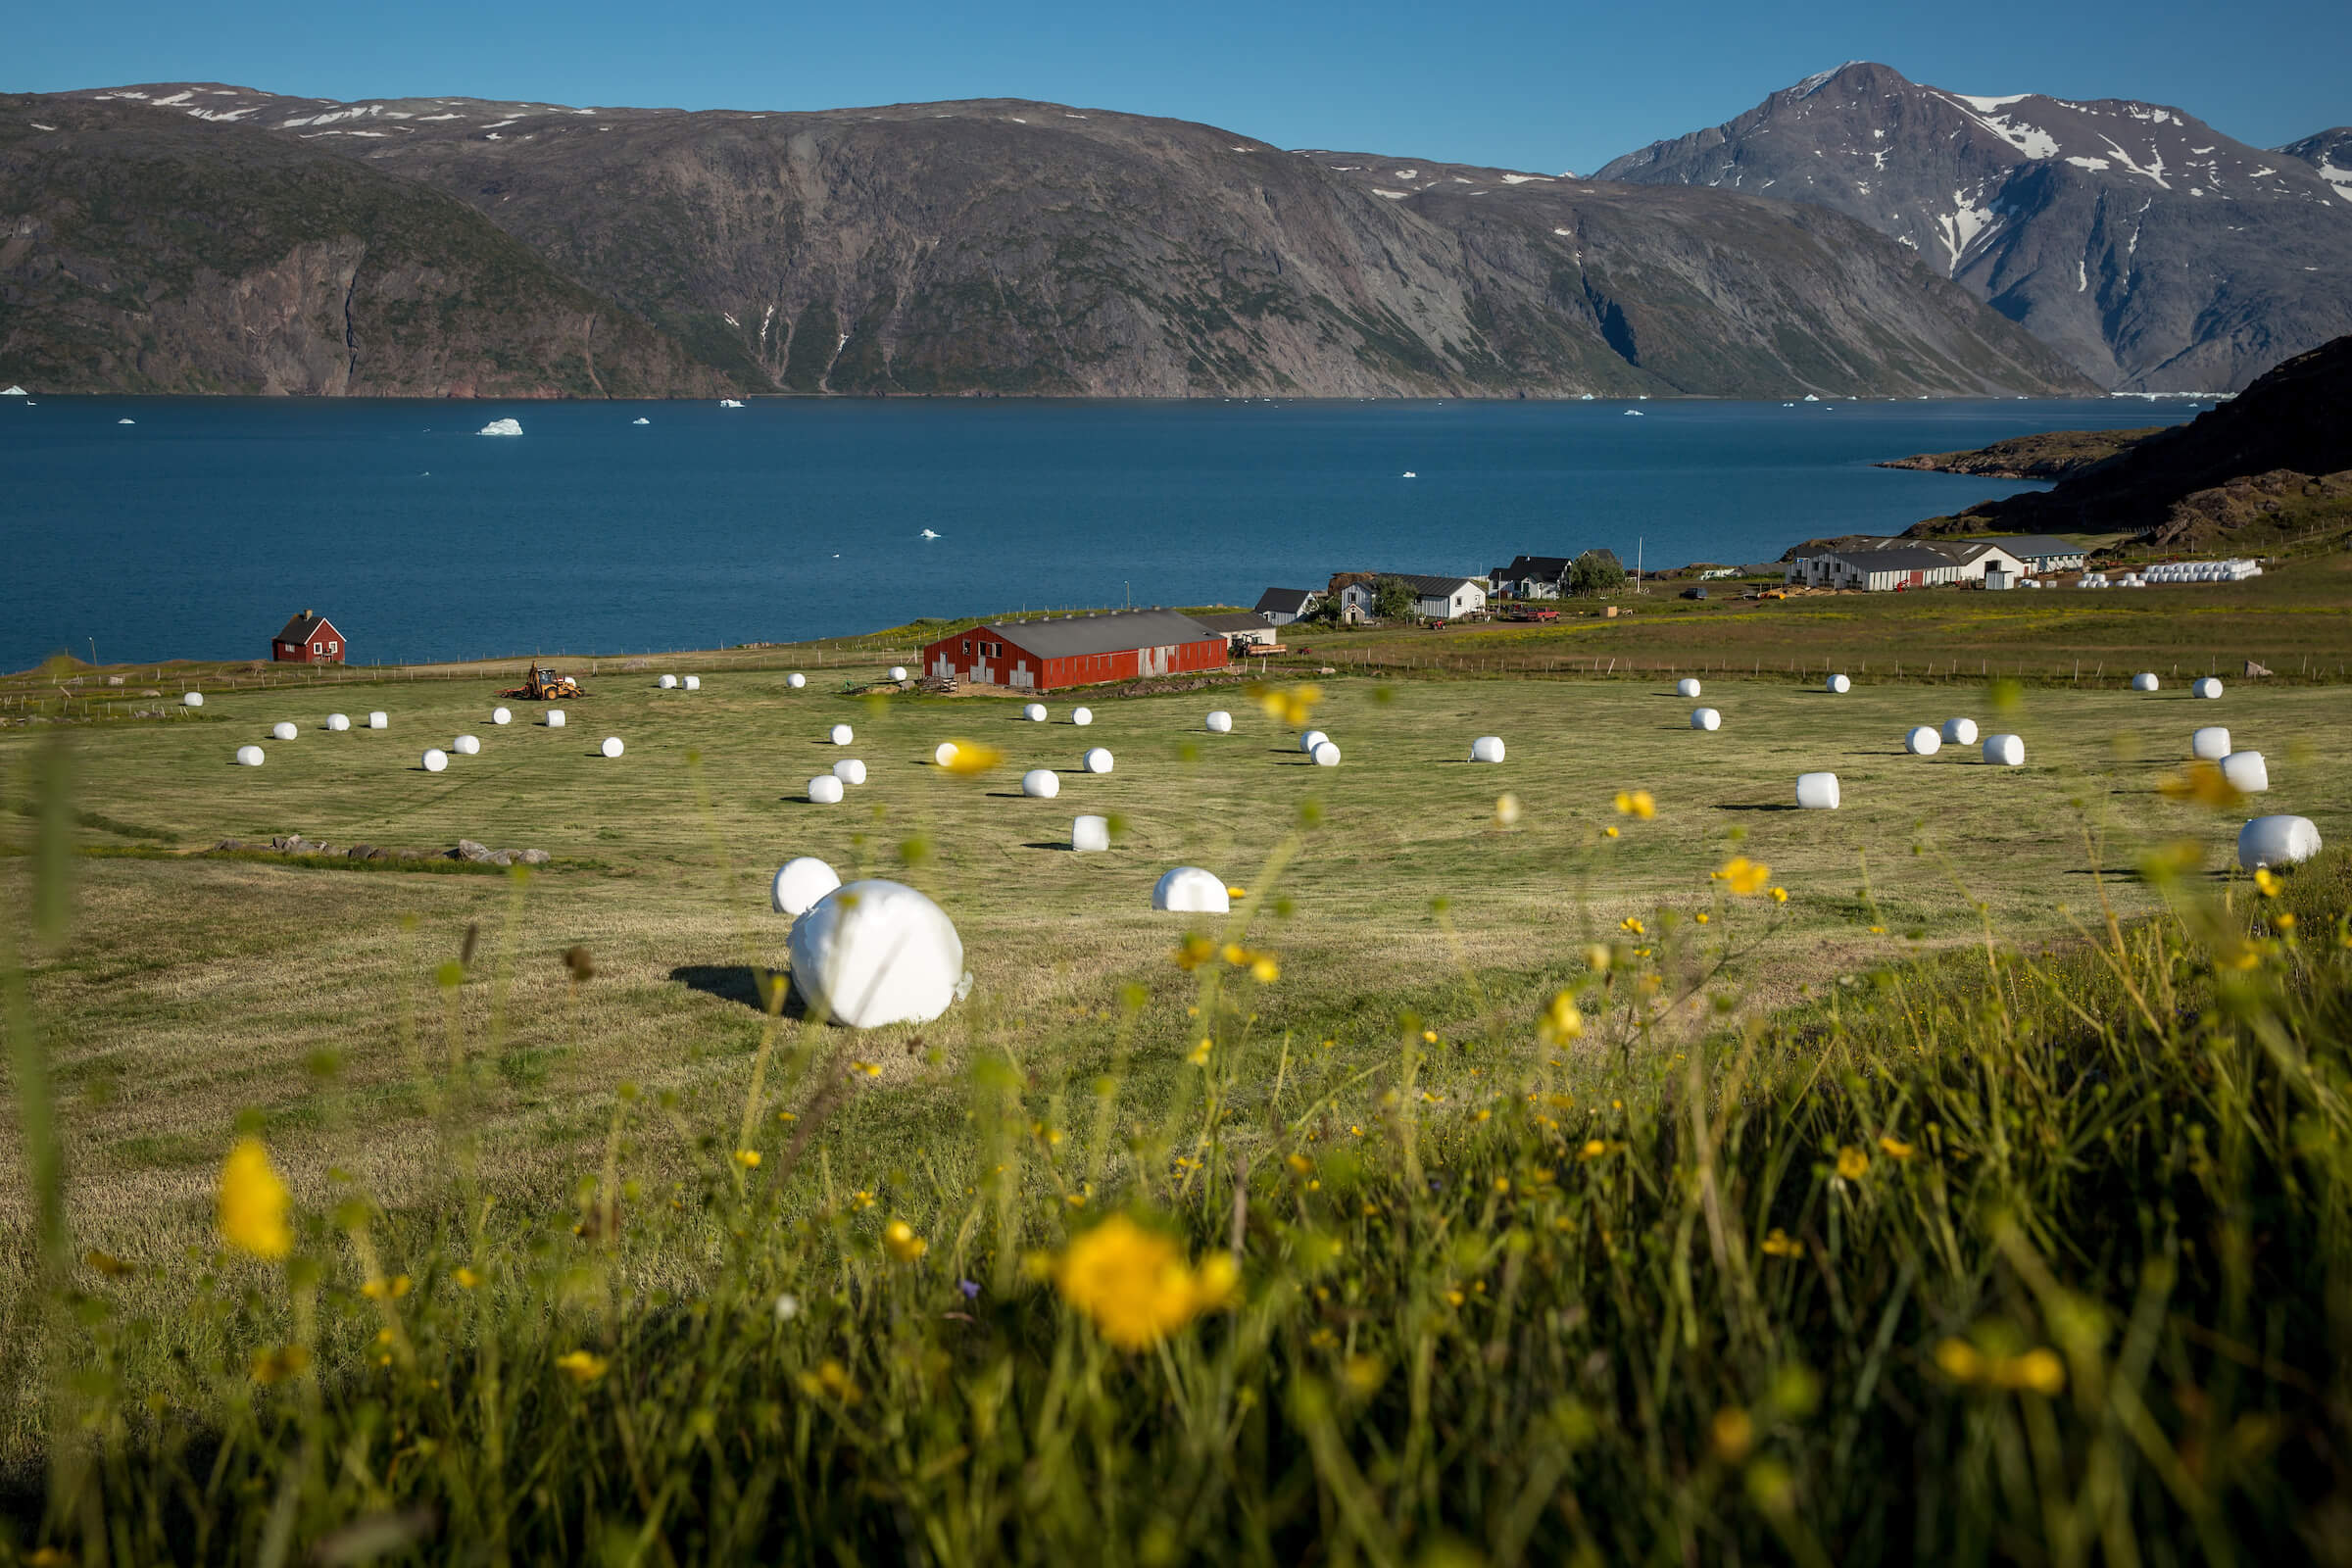 A newly harvested grass field in the sheep farming community Qassiarsuk in South Greenland